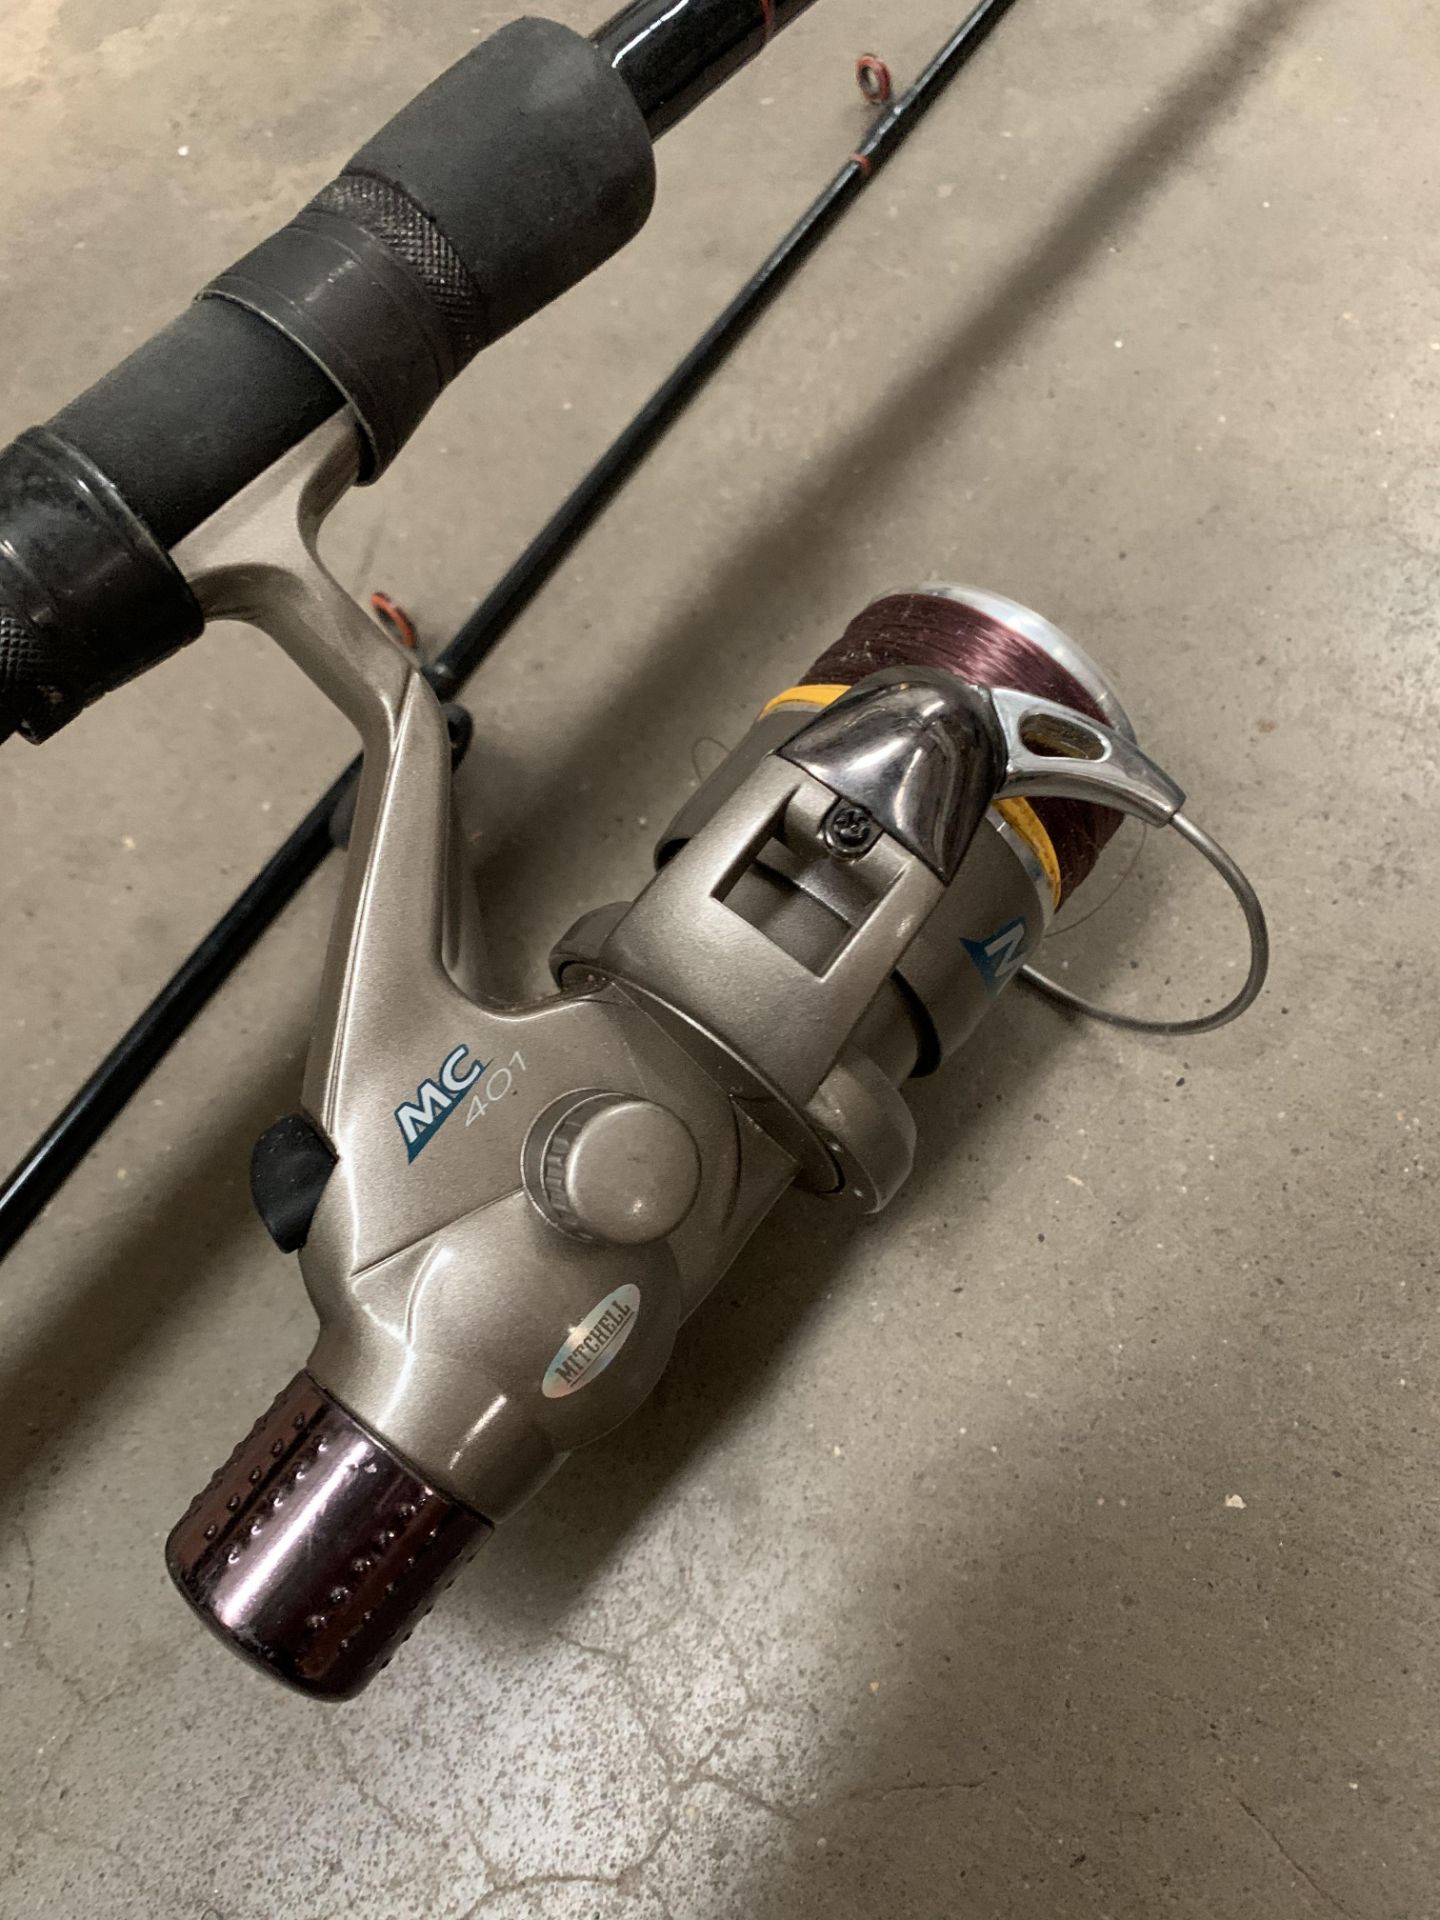 Silstar MX 3535-255 two piece fishing rod with Mitchell MC401 reel - Image 2 of 3